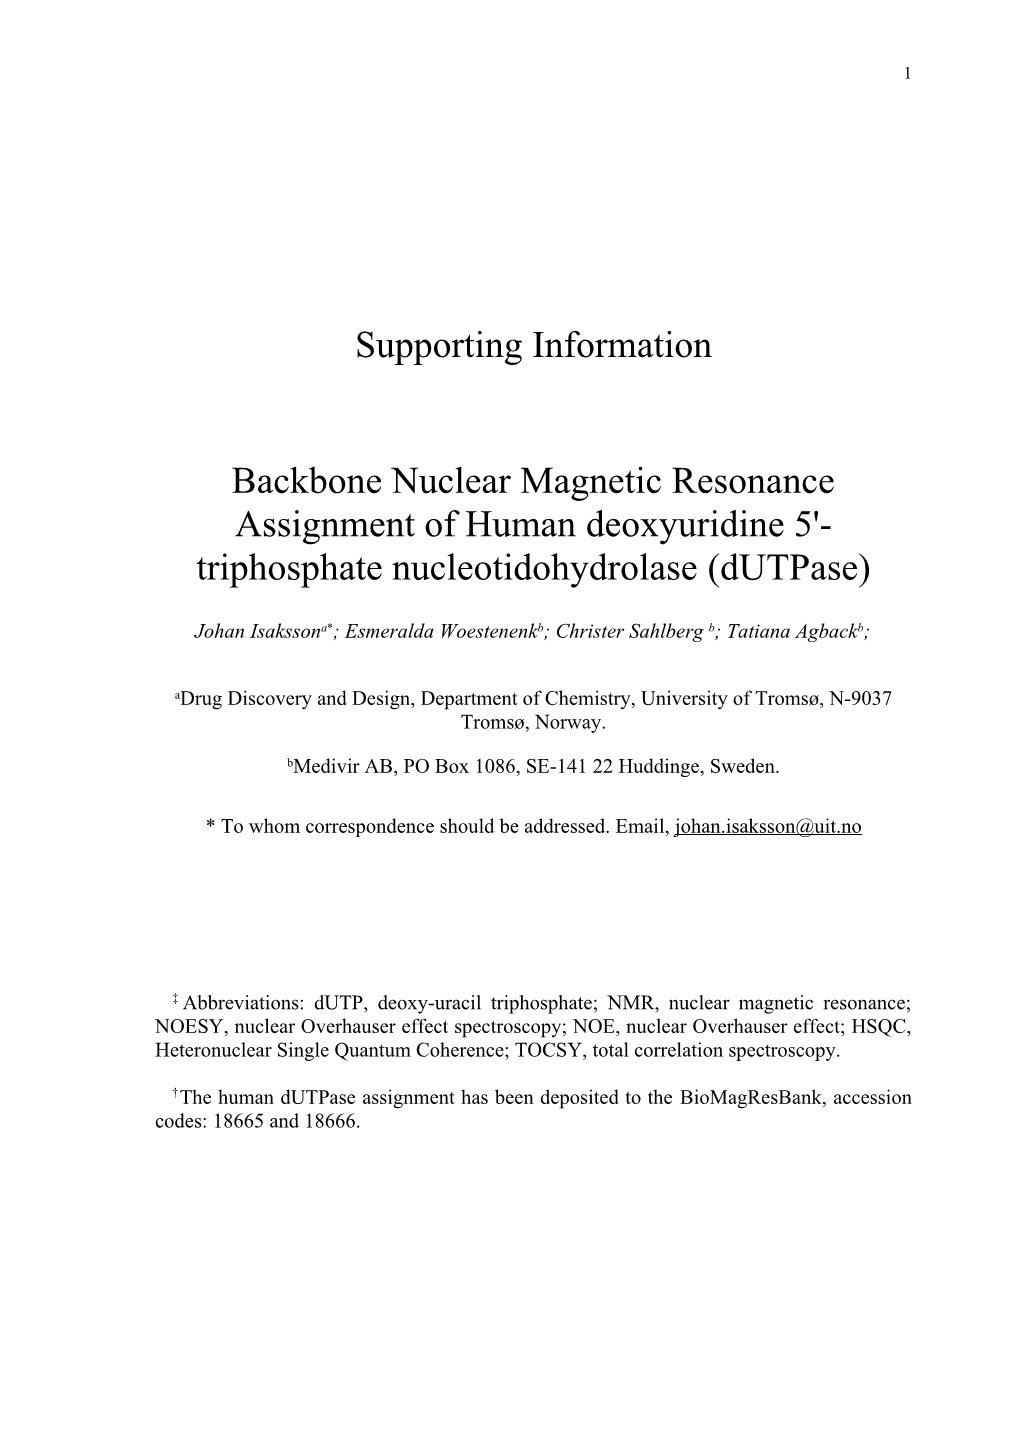 Backbone Nuclear Magnetic Resonance Assignment of Human Deoxyuridine 5'-Triphosphate